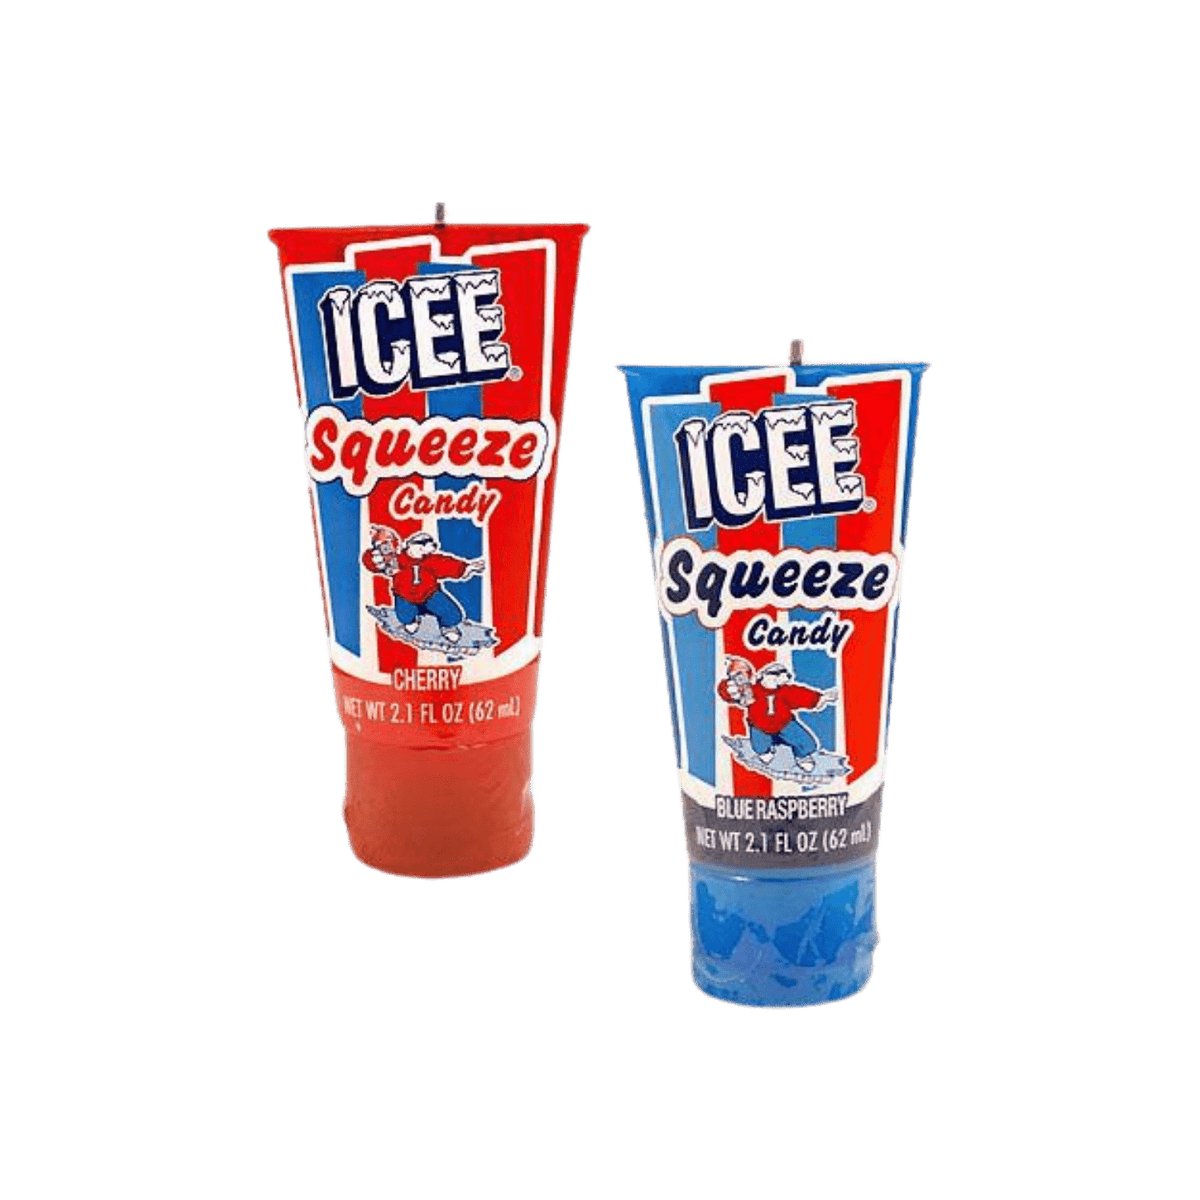 Lolli and Pops Novelty Icee Squeeze Candy